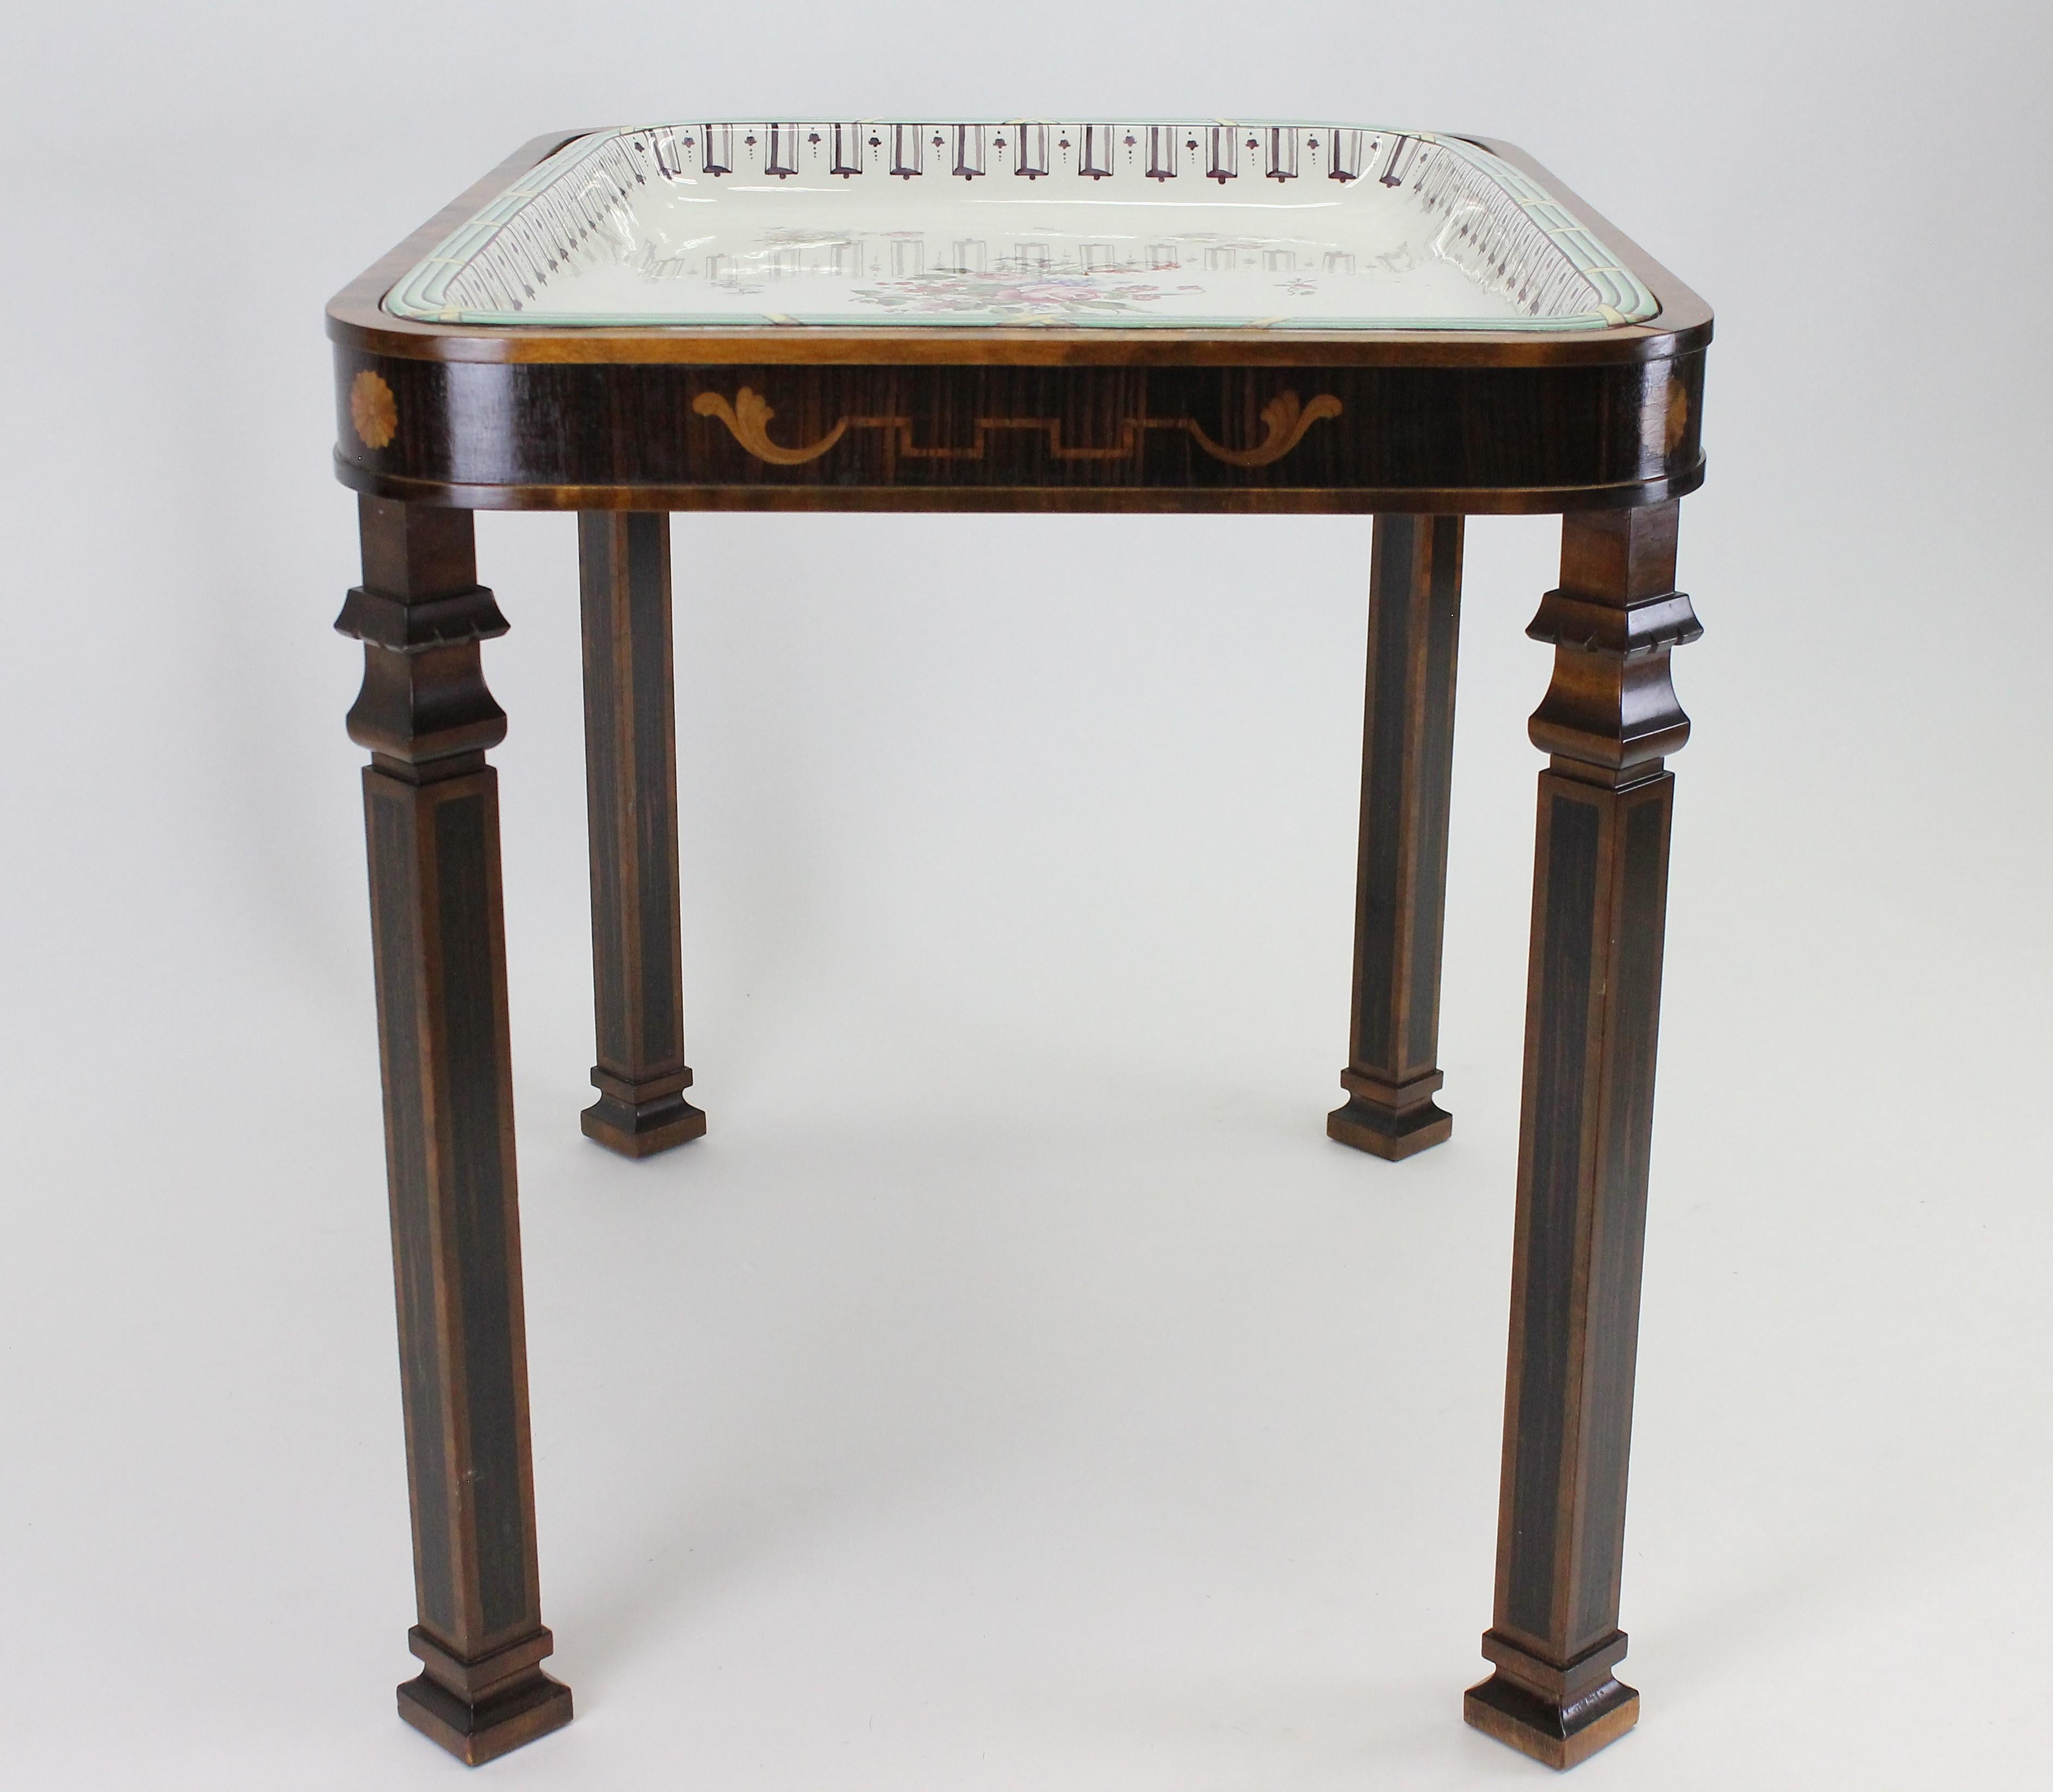 Marquetry Art Deco Faience Tray Table, Swedish Grace, 1920s